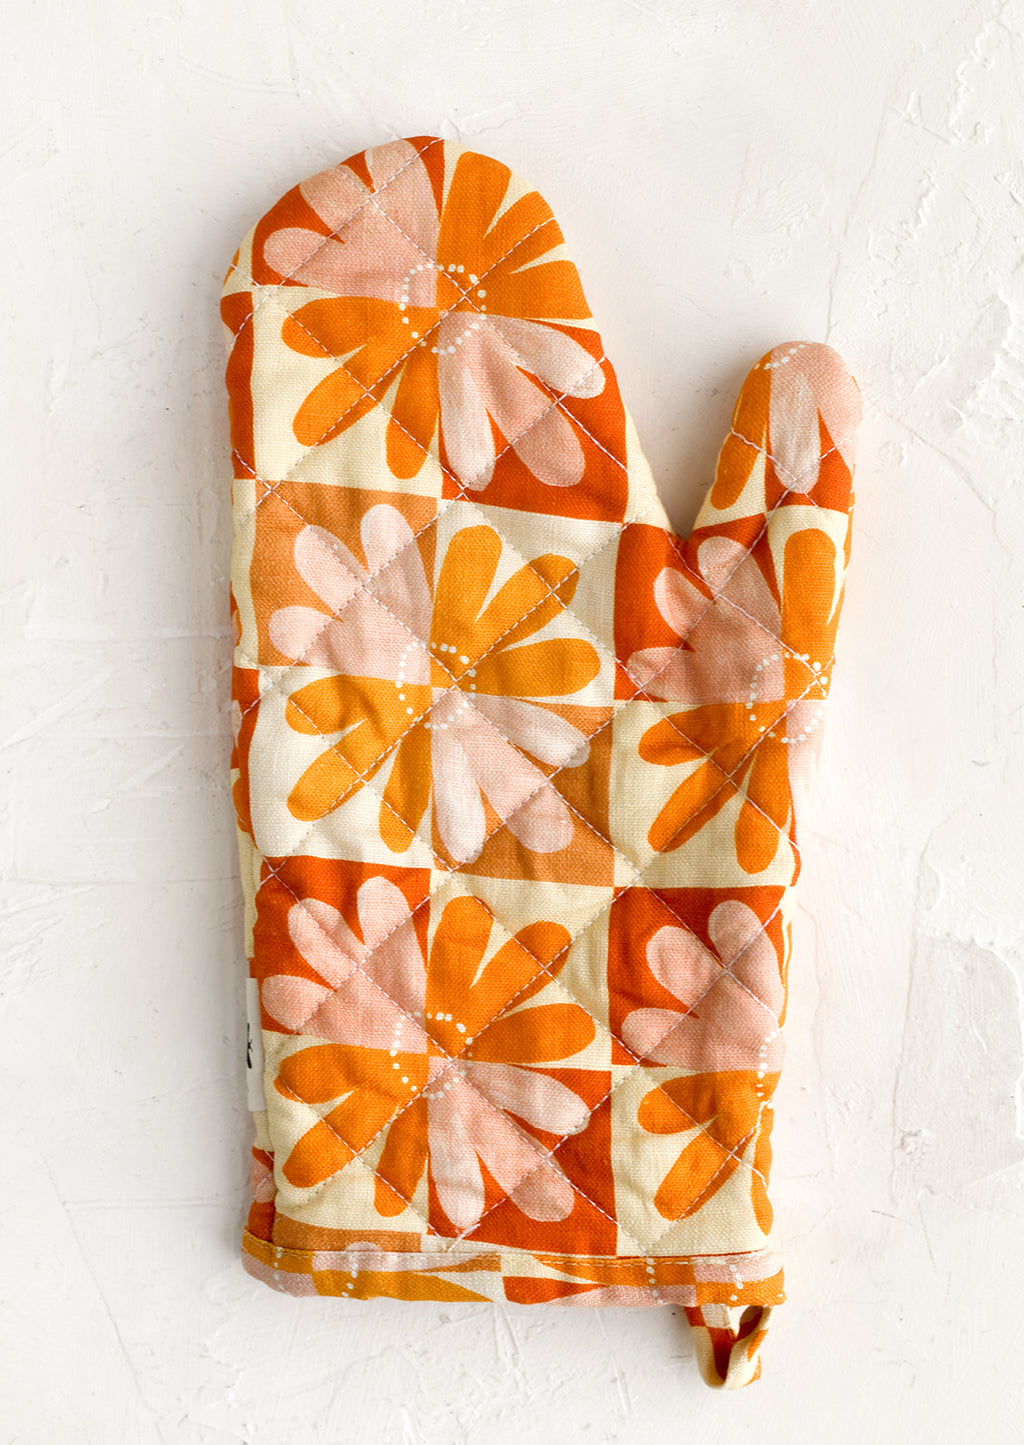 Tomato Multi: A retro floral print quilted oven mitt in red, yellow, orange and pink.